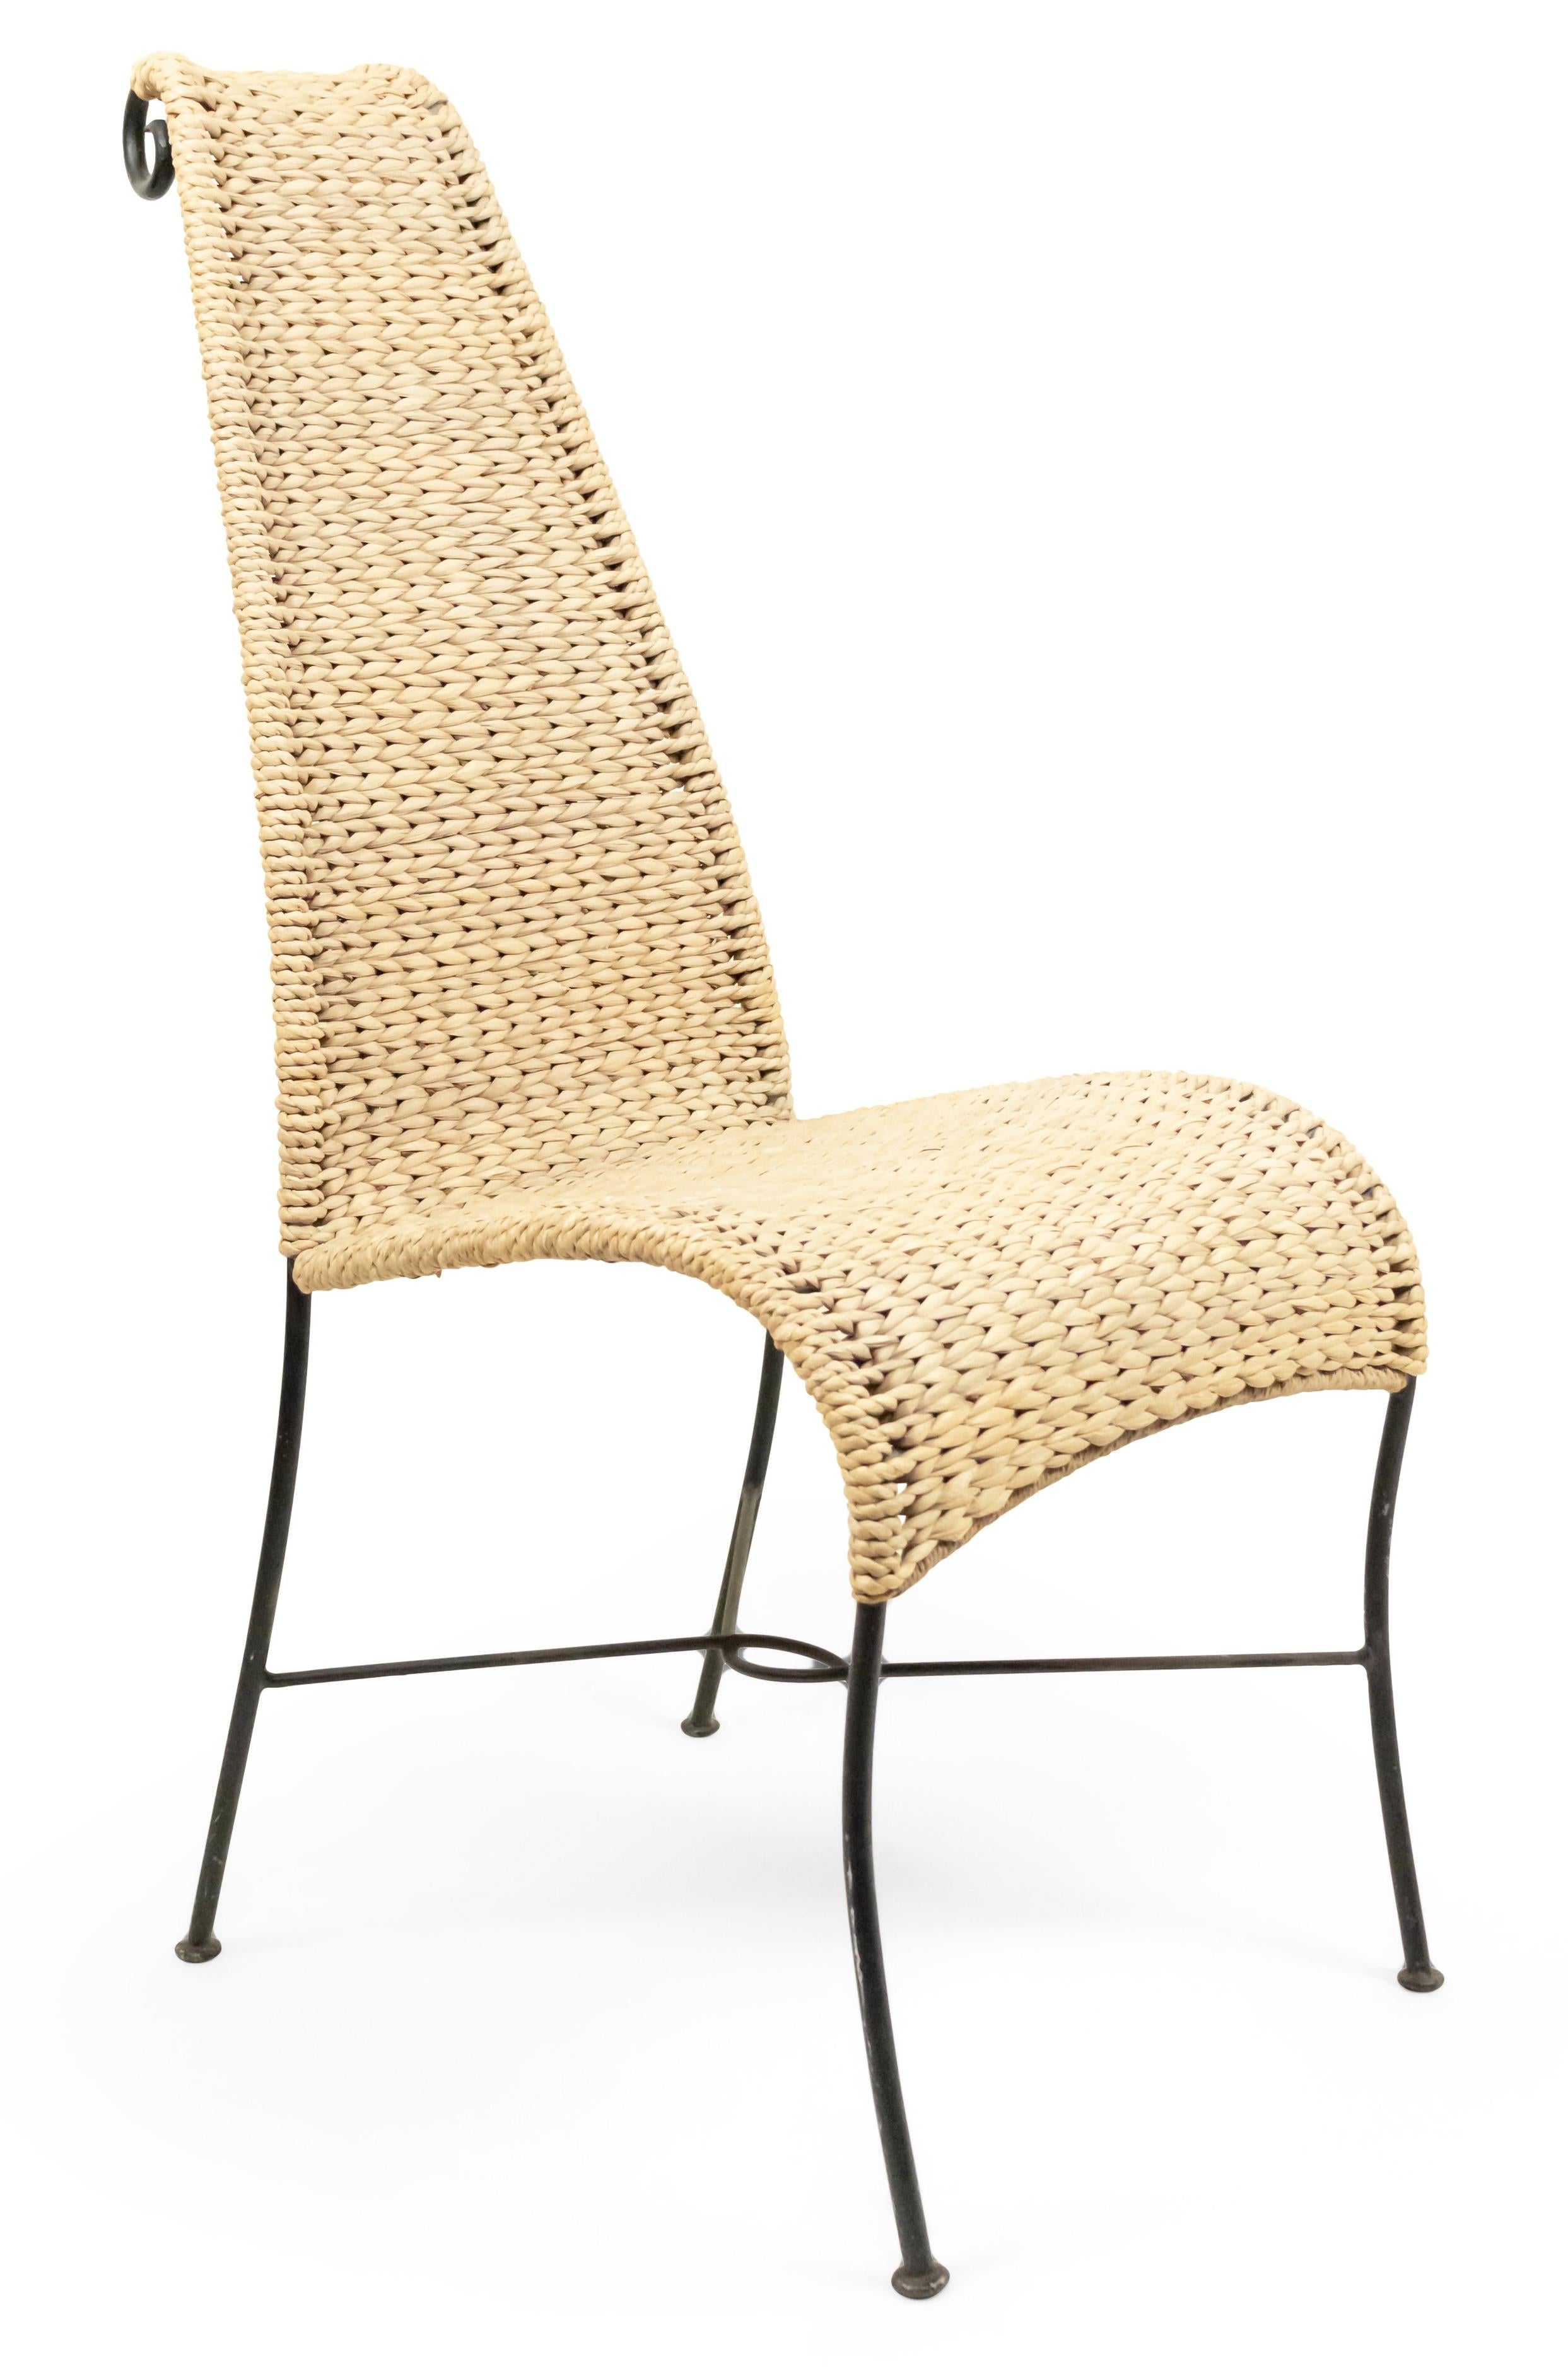 American Post-War Design natural rattan woven side chair with tapered designed high back and a black iron frame.
 